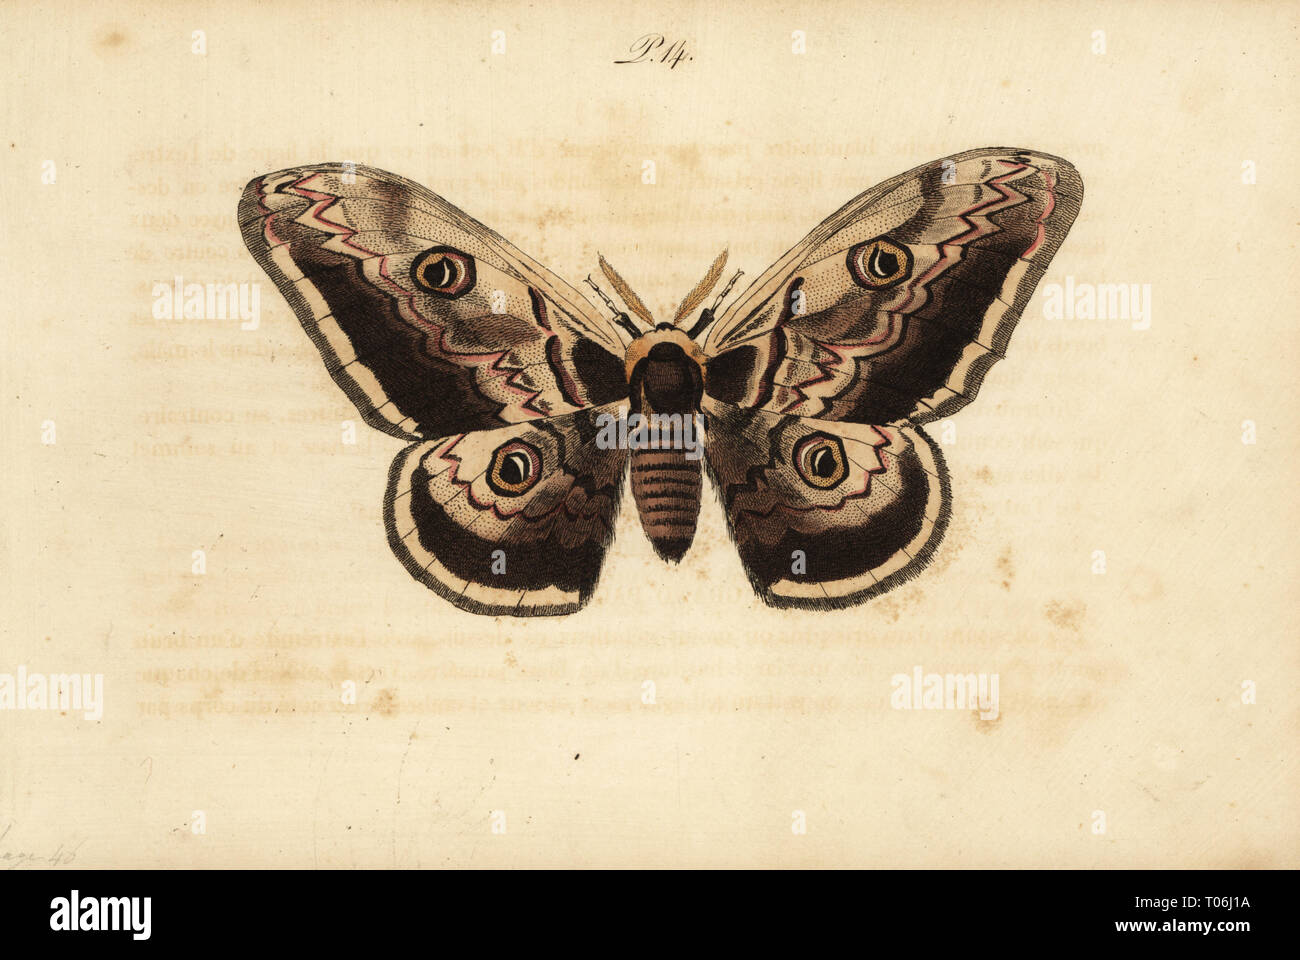 Giant peacock moth, Saturnia pyri. Bombyx grand paon. Handcoloured lithograph from Musee du Naturaliste dedie a la Jeunesse, Histoire des Papillons, Hippolyte and Polydor Pauquet, Paris, 1833. Stock Photo